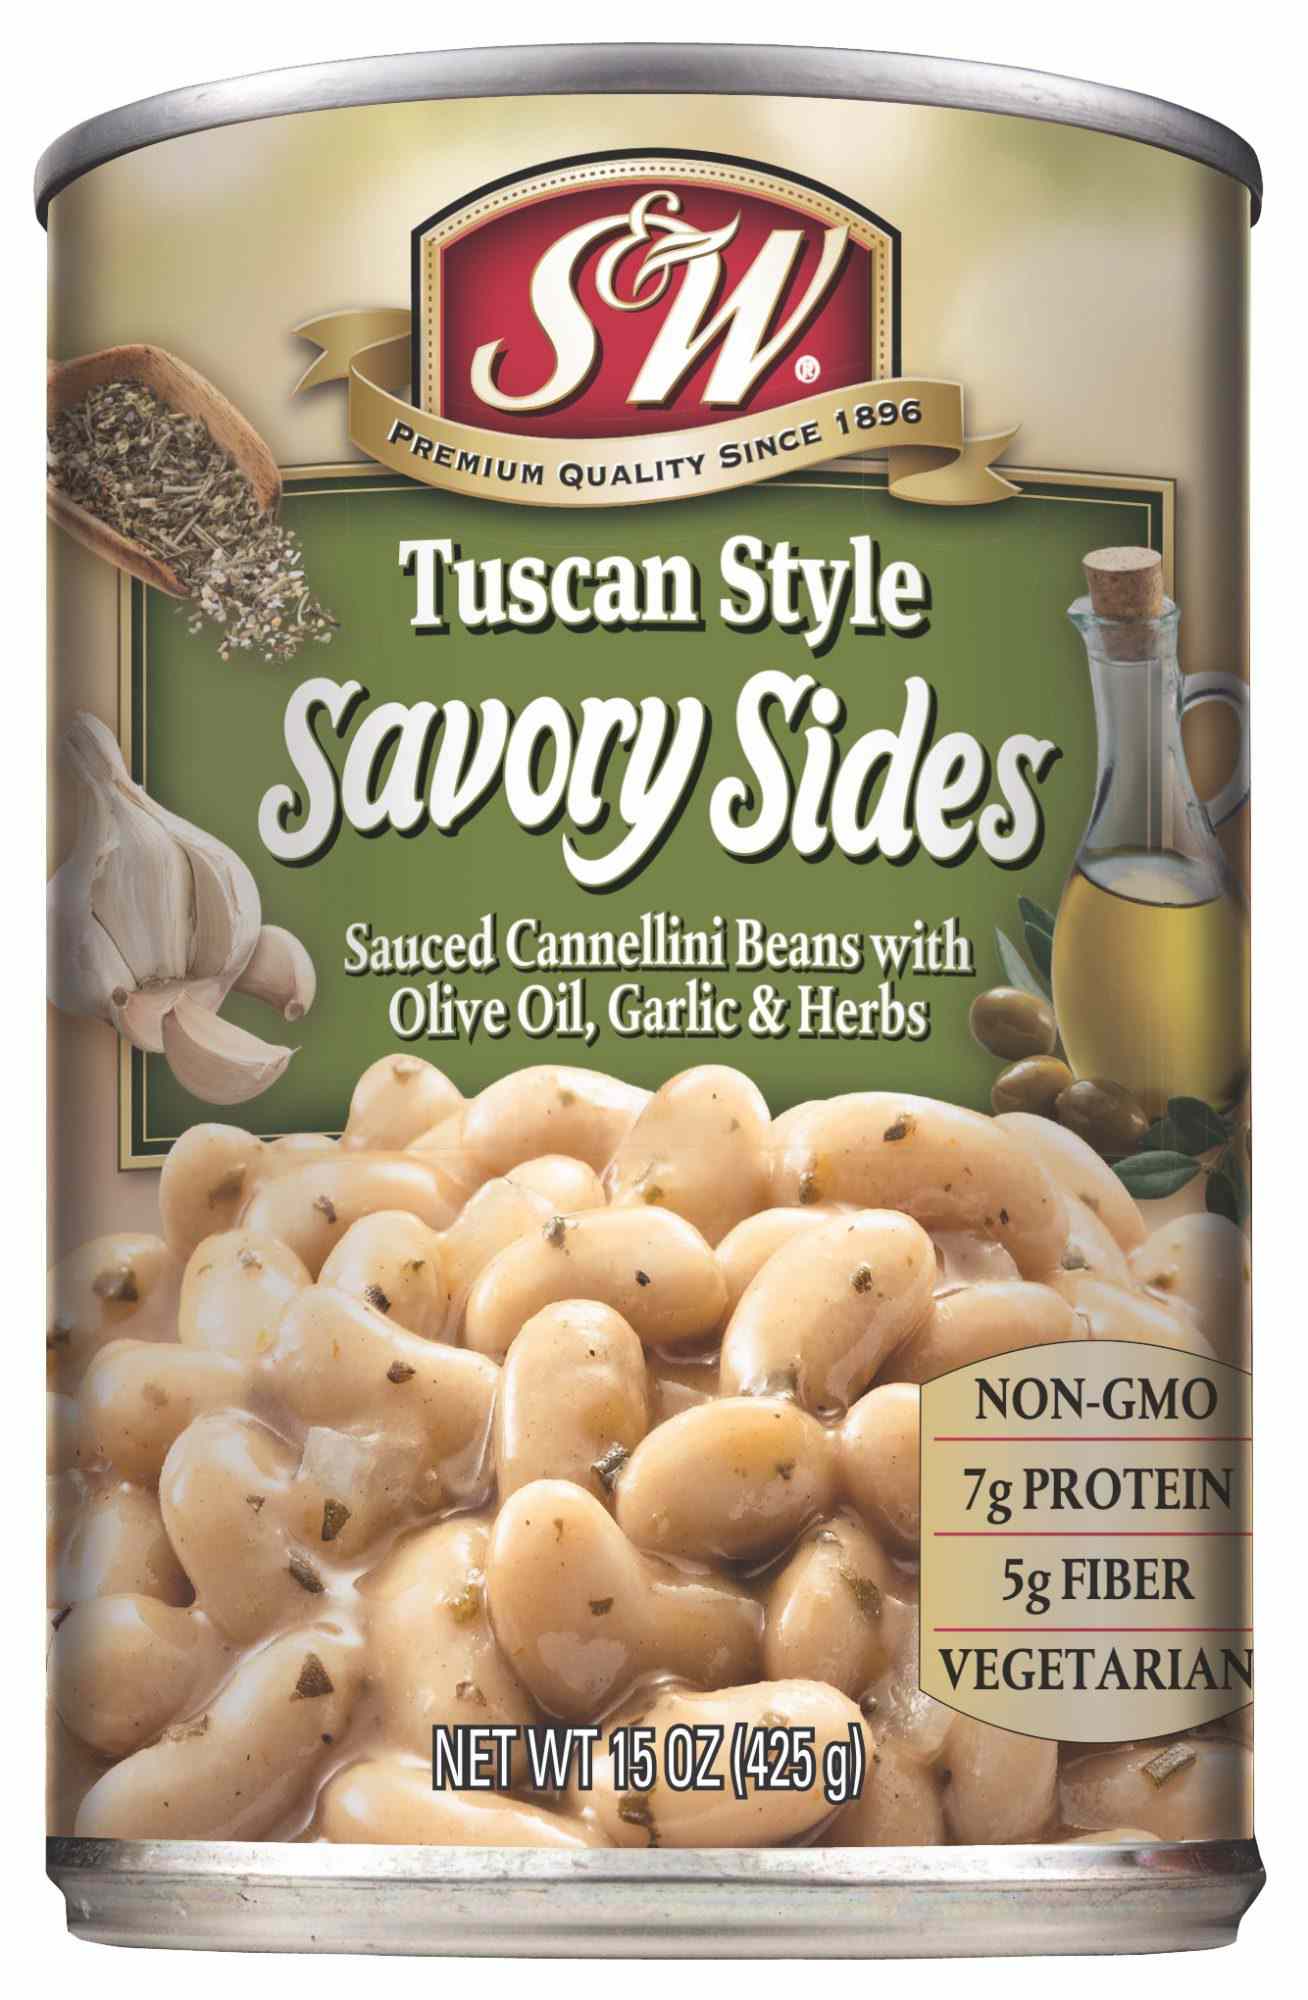 Best Canned Beans: S&W Tuscan Style Savory Sides